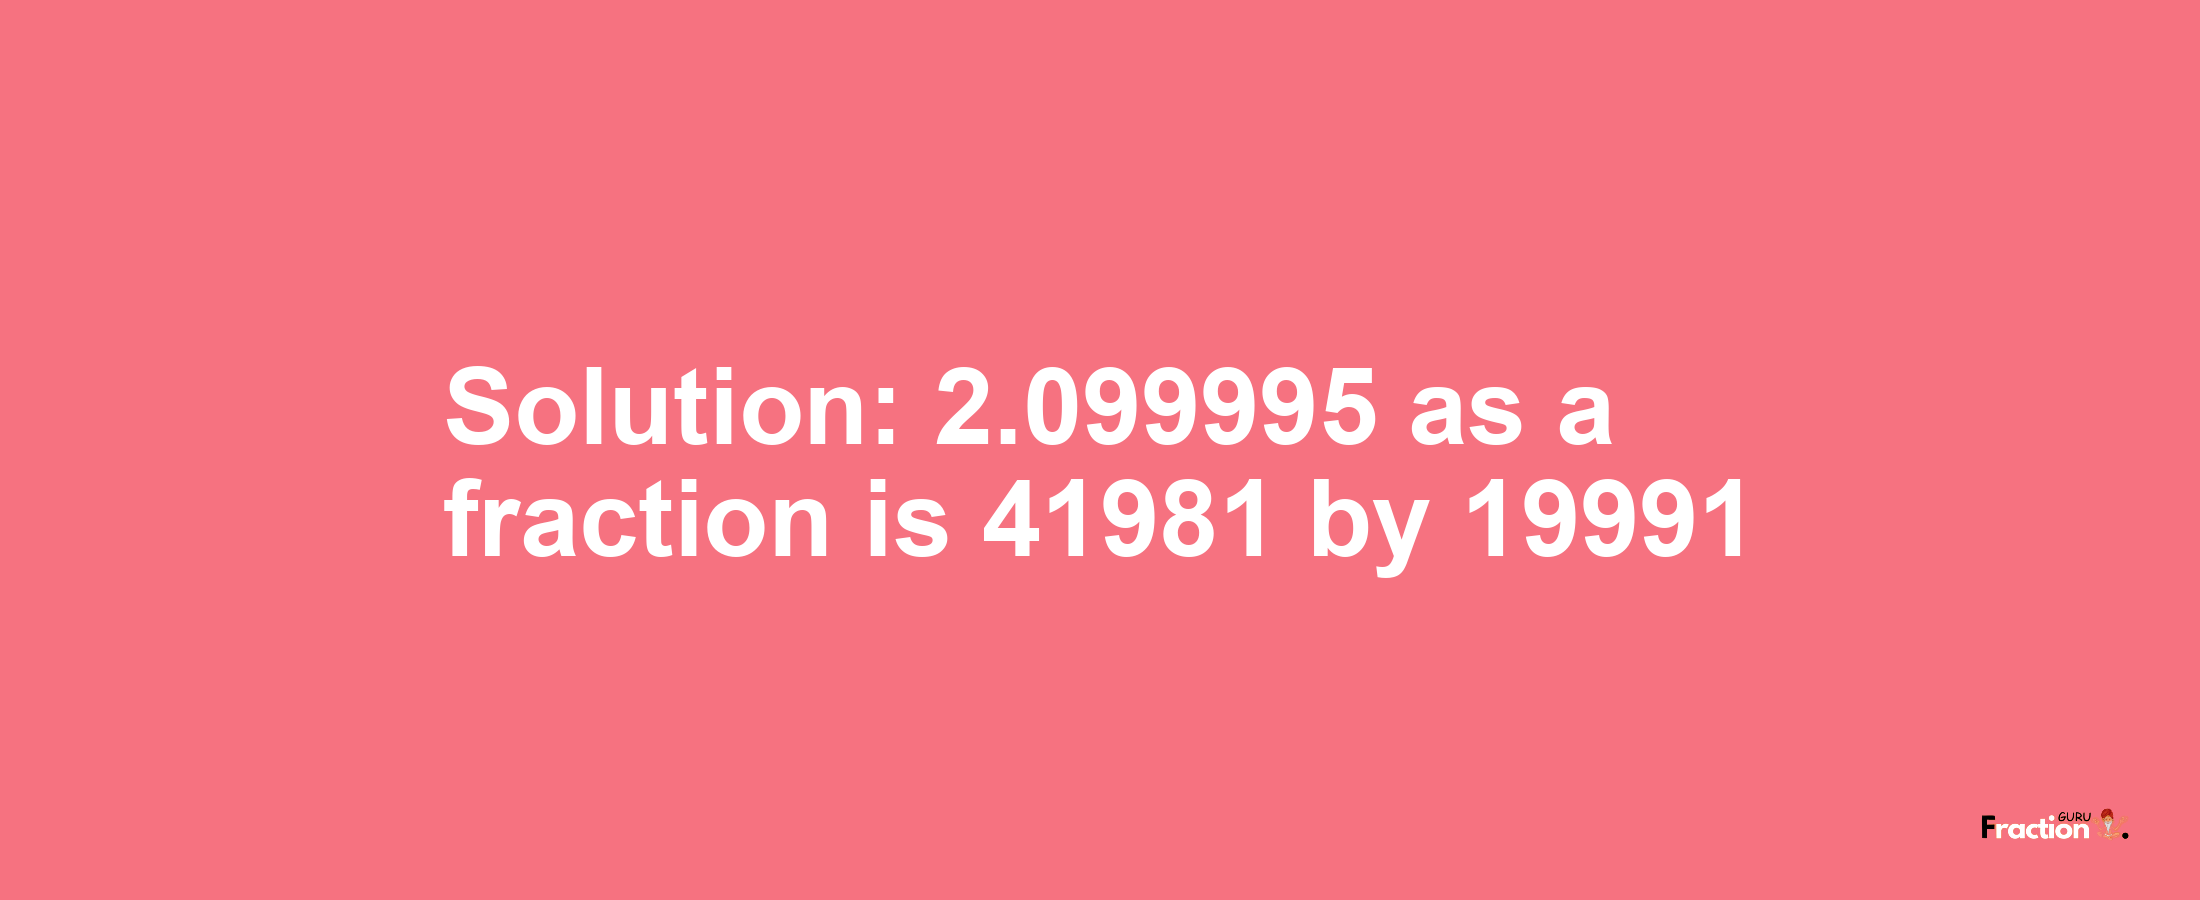 Solution:2.099995 as a fraction is 41981/19991